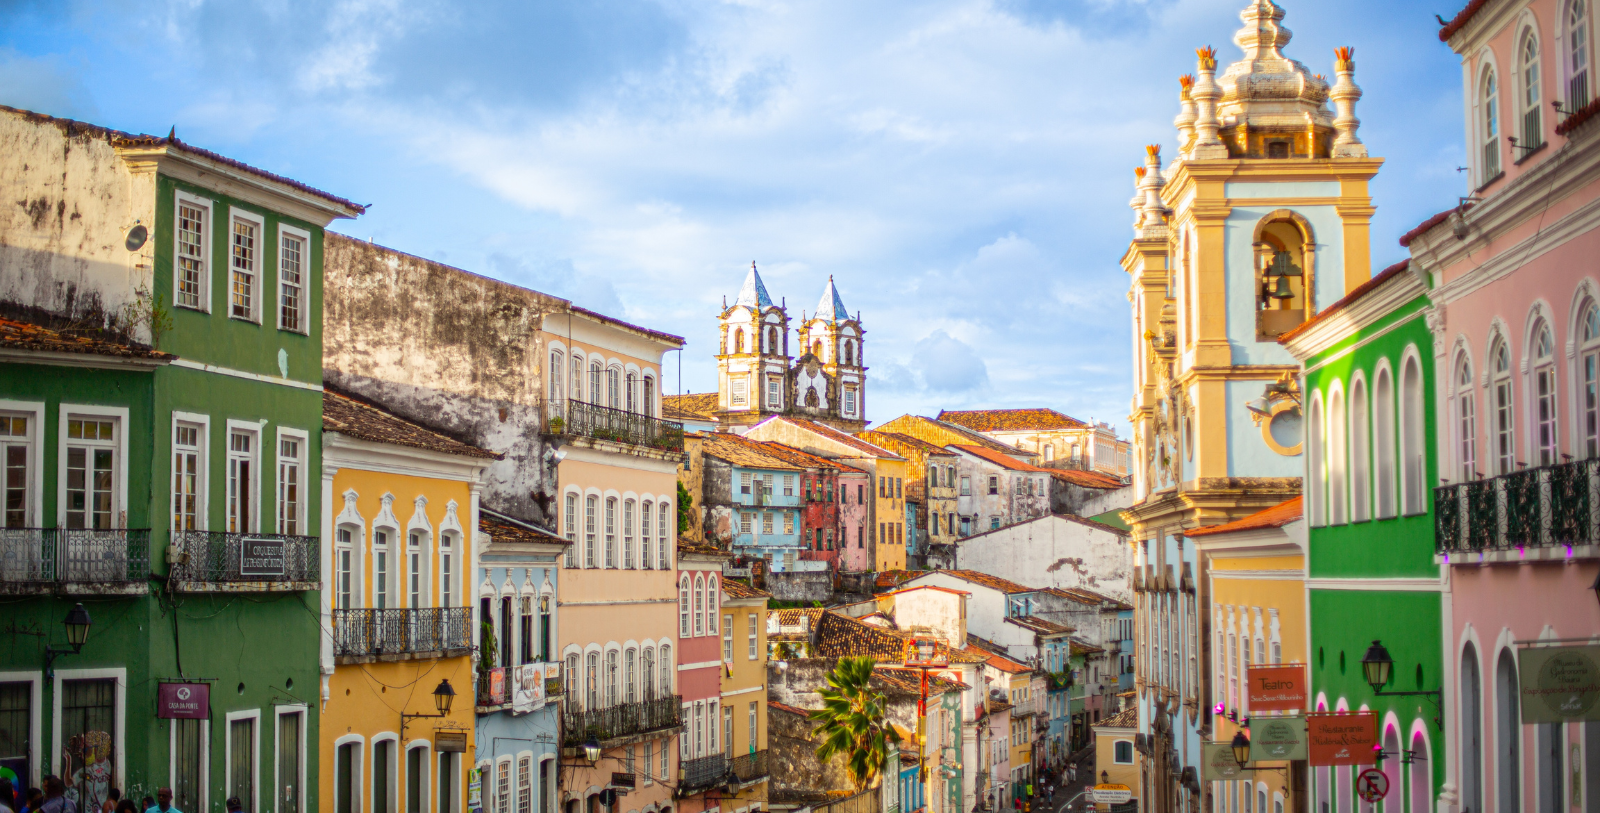 Explore the cobblestone streets of Pelourinho, a bewitching barrio with a fascinating history and rich cultural heritage that are every bit as colorful as its kaleidoscope of red-roofed colonial-style buildings.